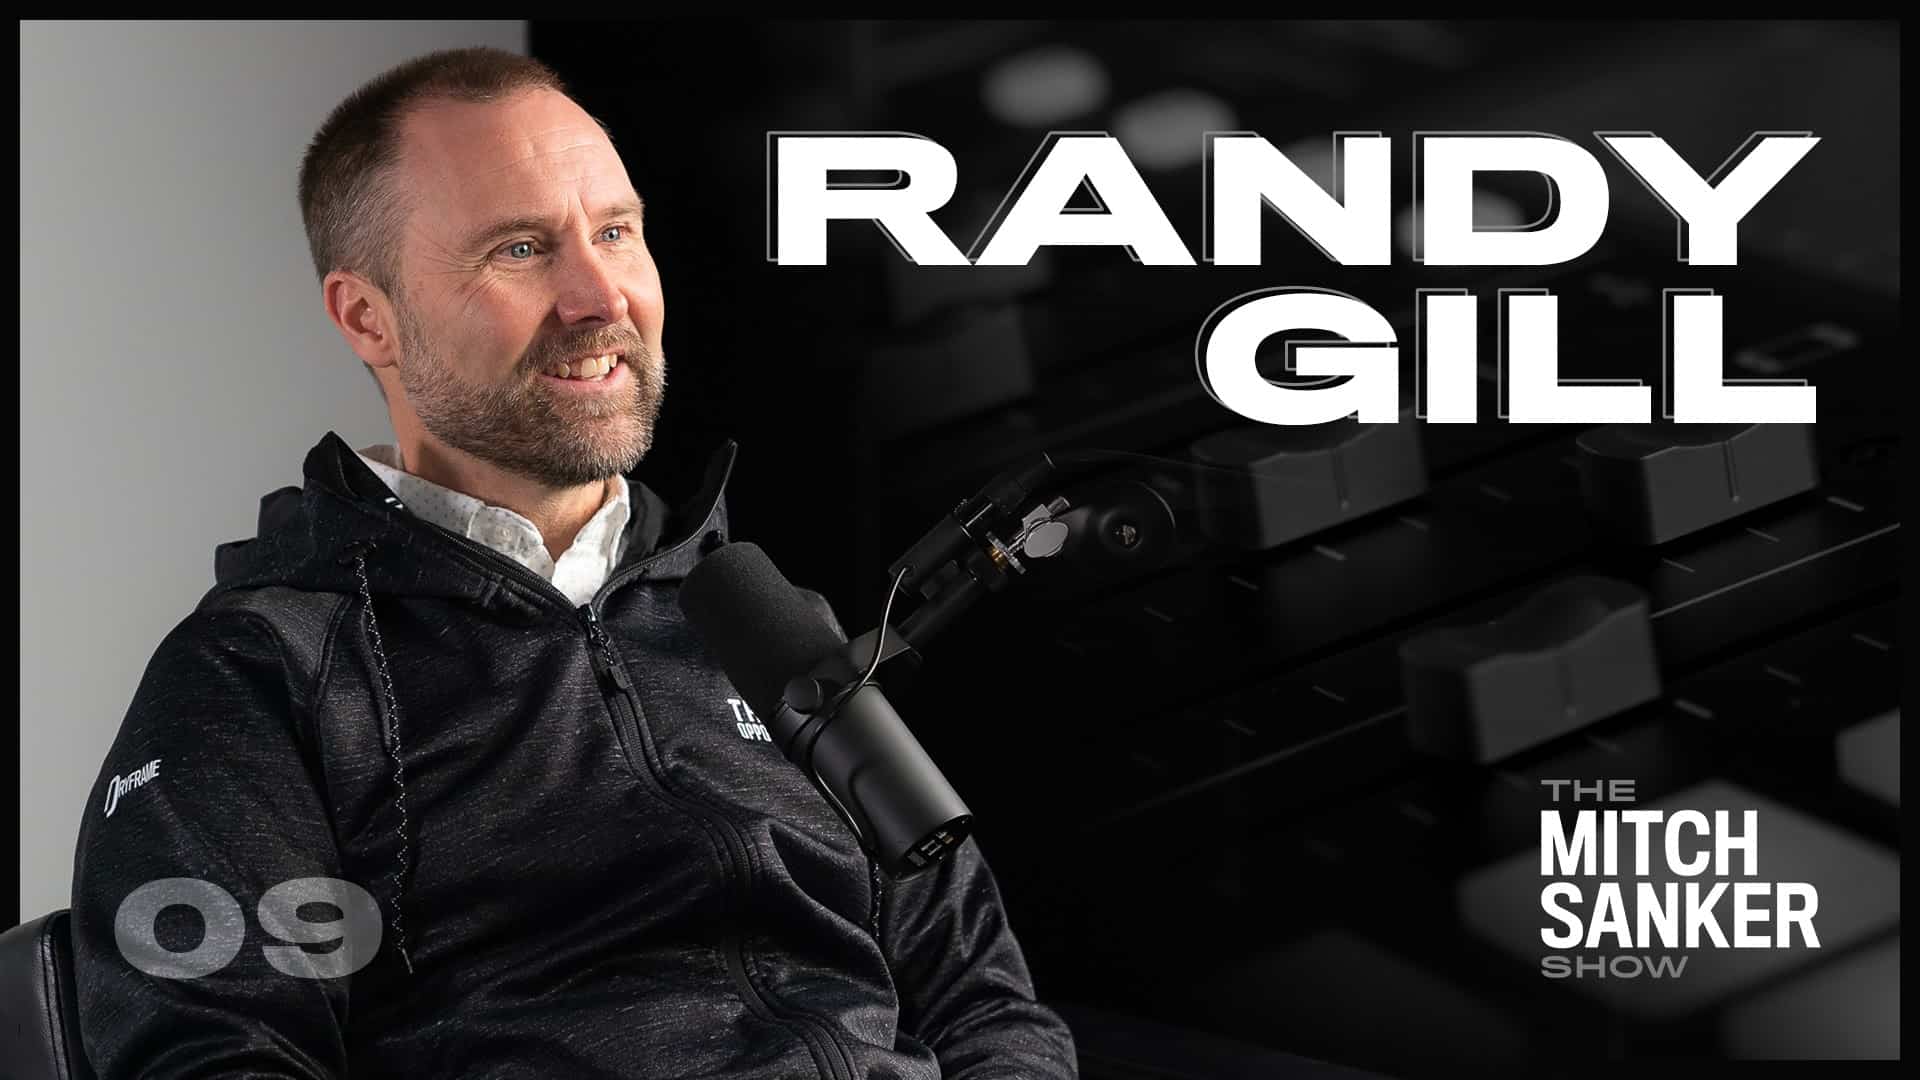 Read more about the article The Mitch Sanker Show – Episode 09 featuring Randy Gill